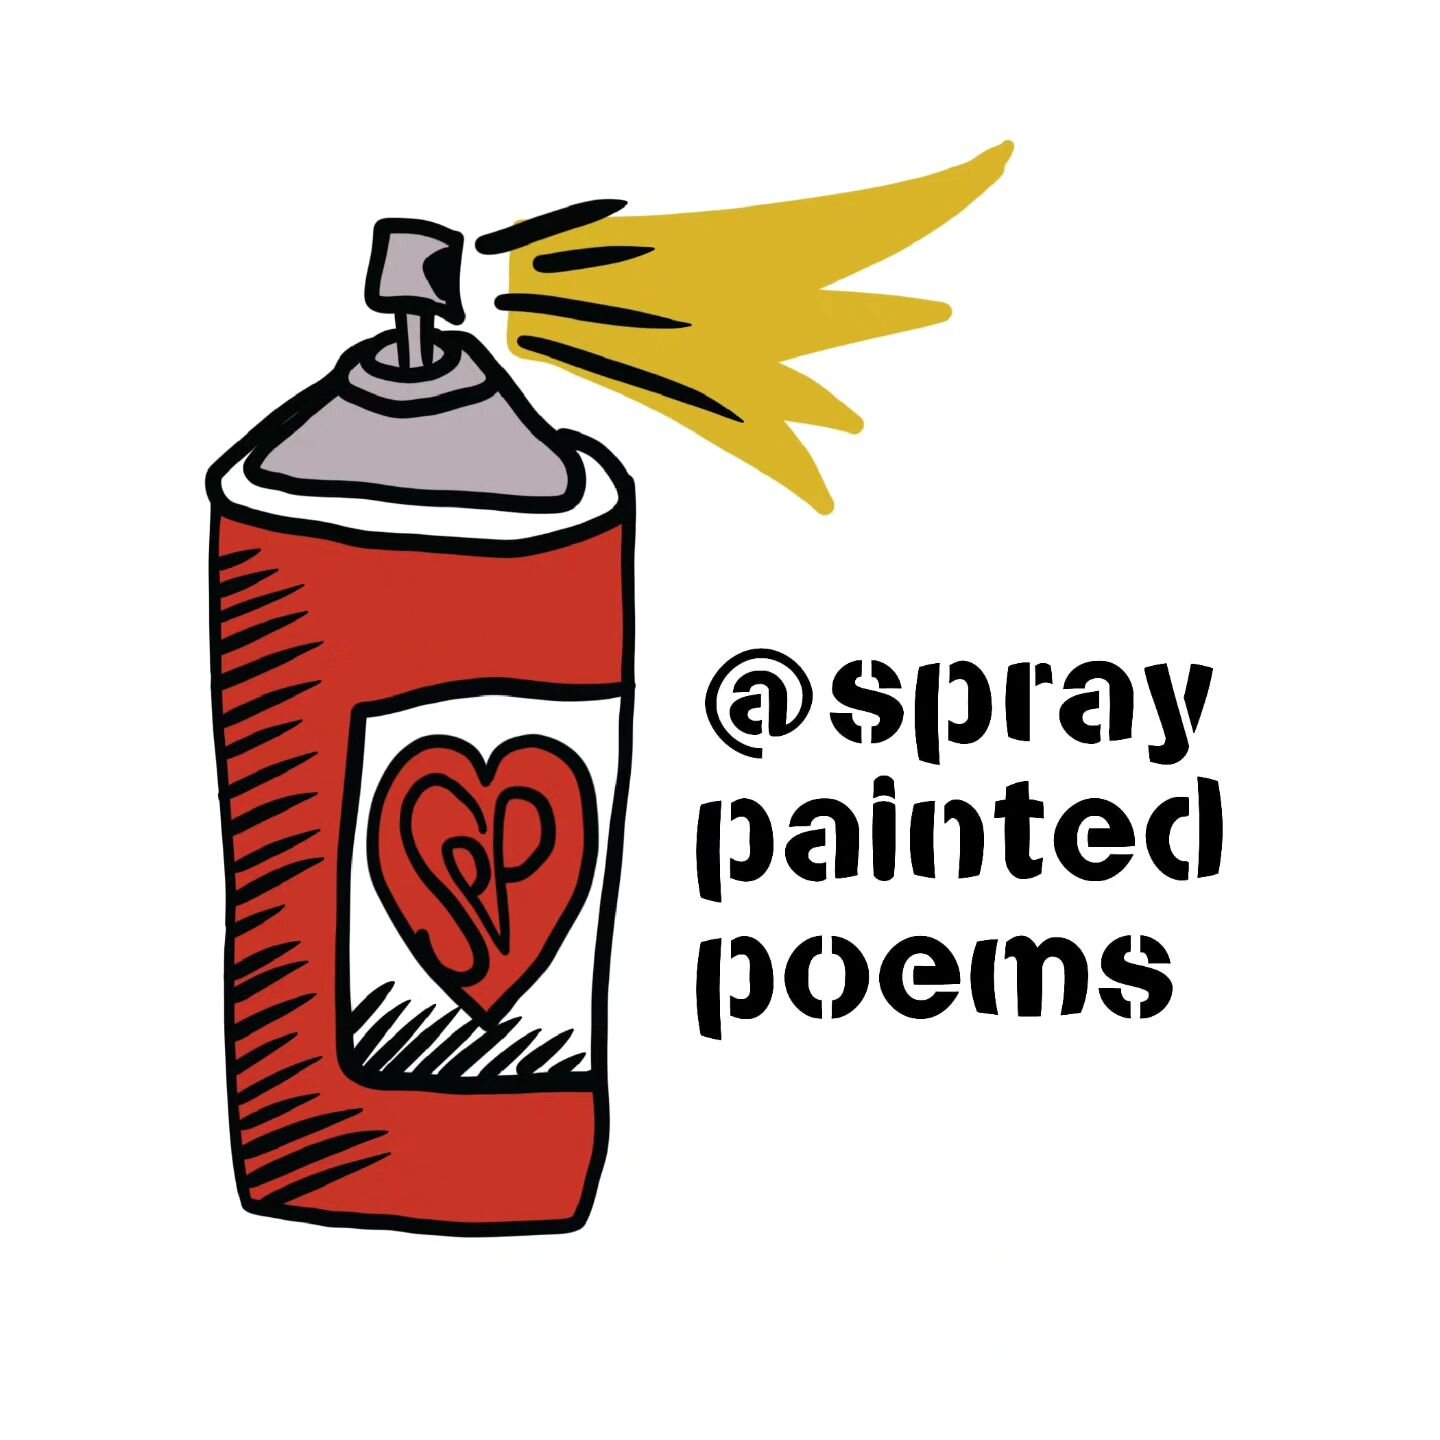 So jazzed for the launch of SprayPaintedPoems! 

@SprayPaintedPoems is like it sounds - short poems spray painted on sidewalks &ndash; no longer than 15 words per poem (or poem snippet). The goal is to create an asset map of Milwaukee neighborhoods, 